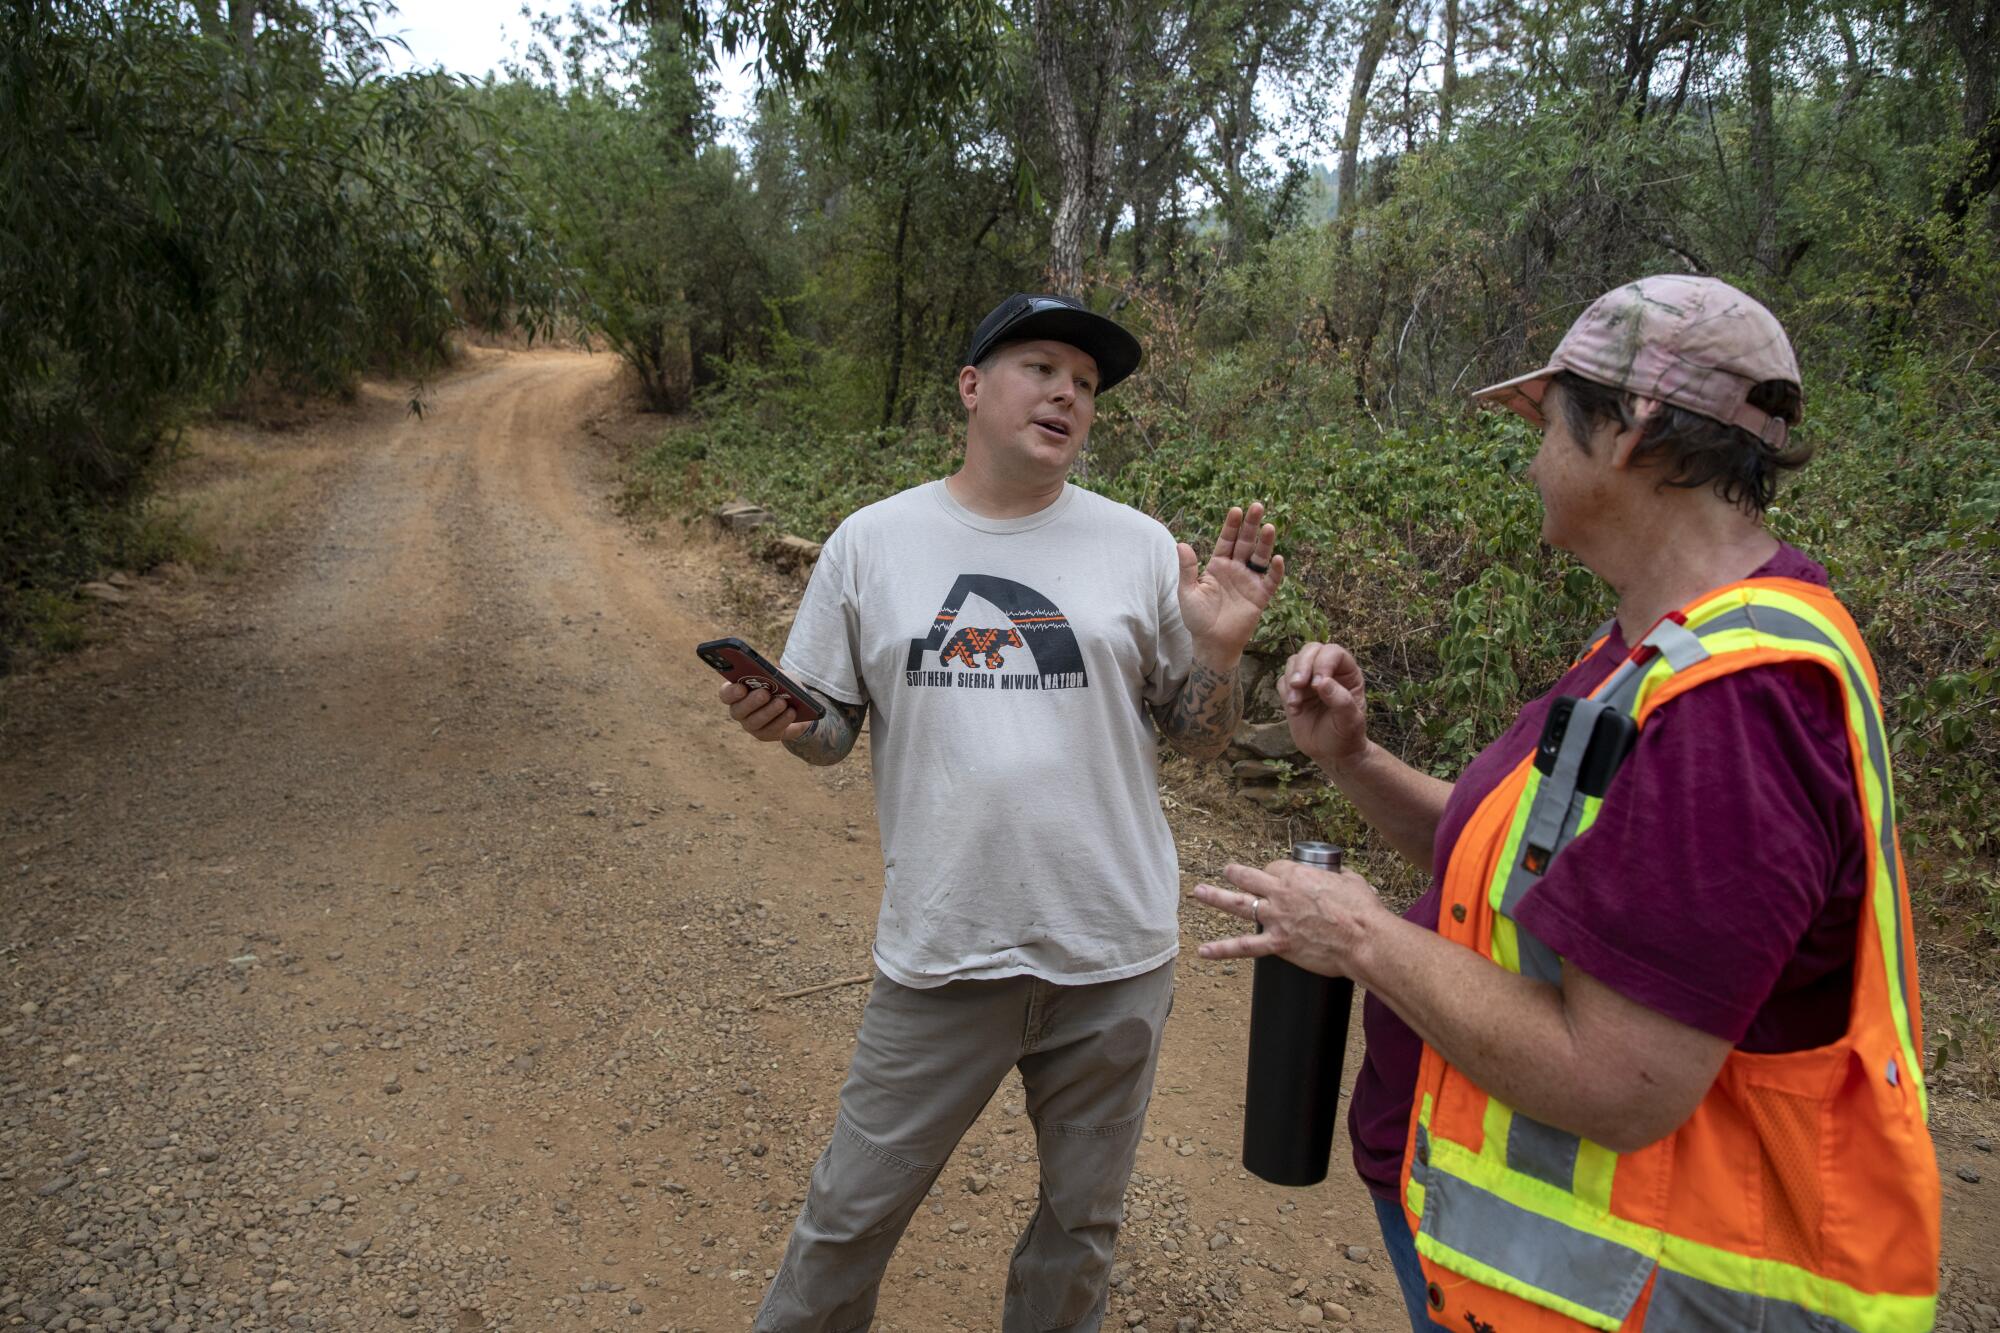 Waylon Coats talks with archaeologist Charlane Gross on a dirt road.